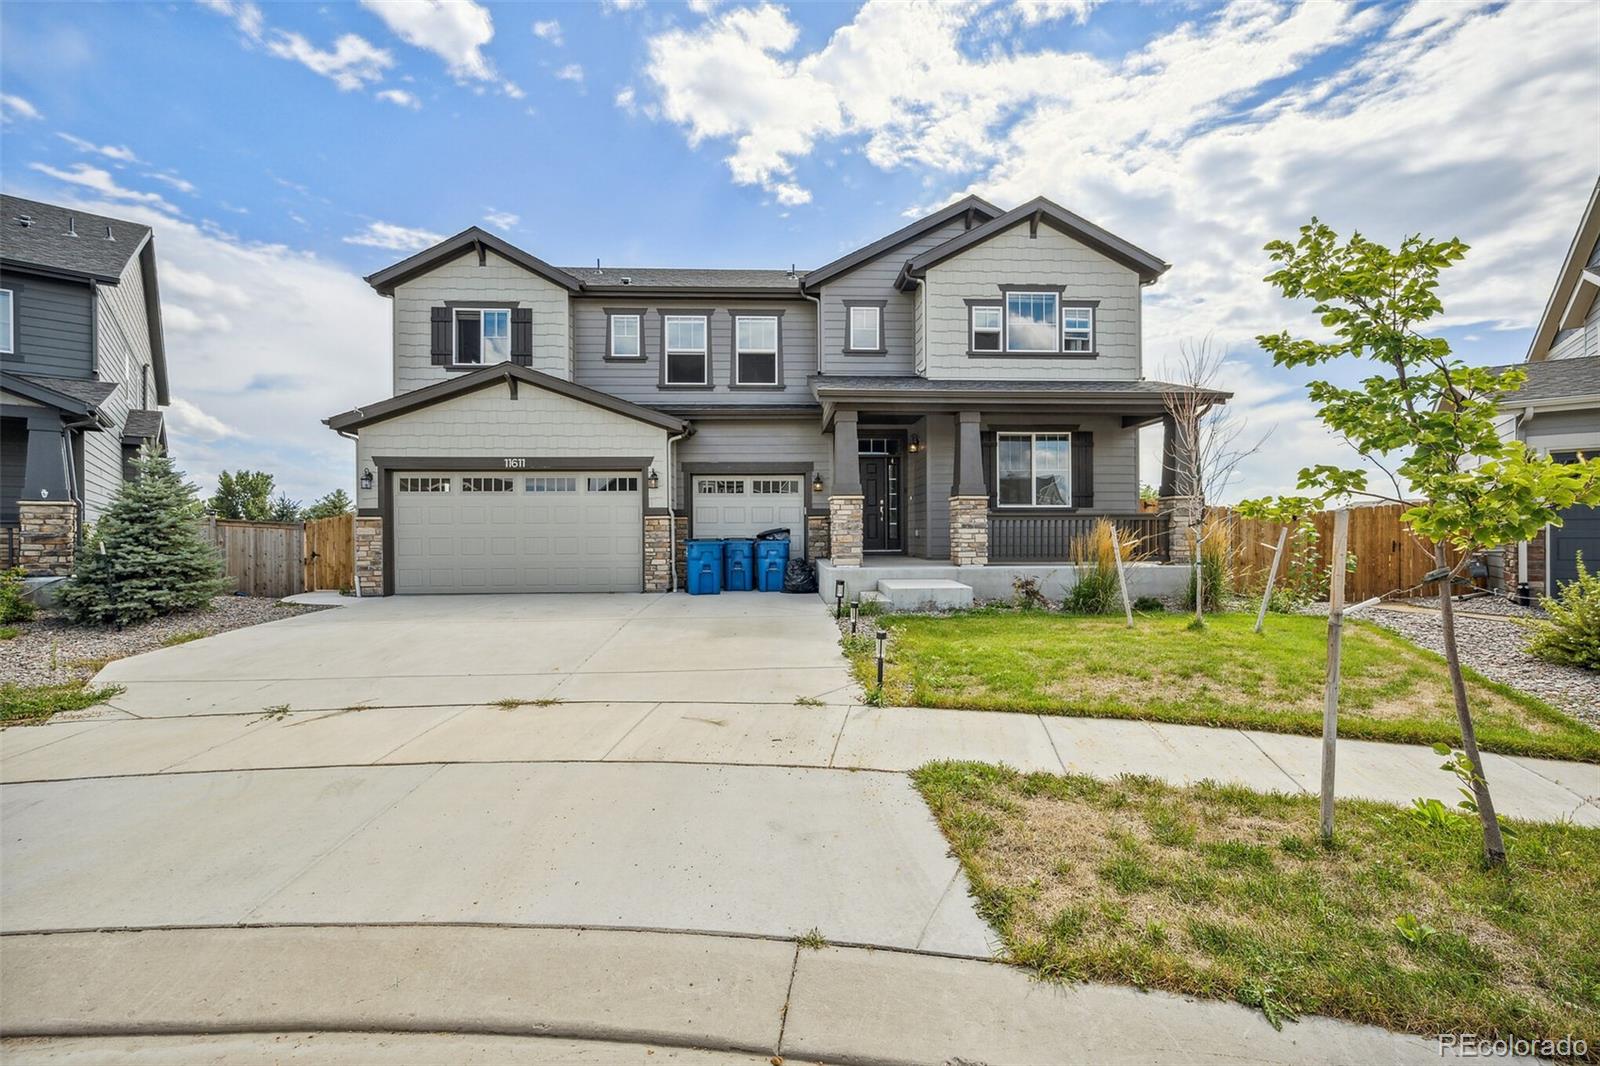 11611  Mobile Court, commerce city MLS: 2049273 Beds: 4 Baths: 4 Price: $700,000